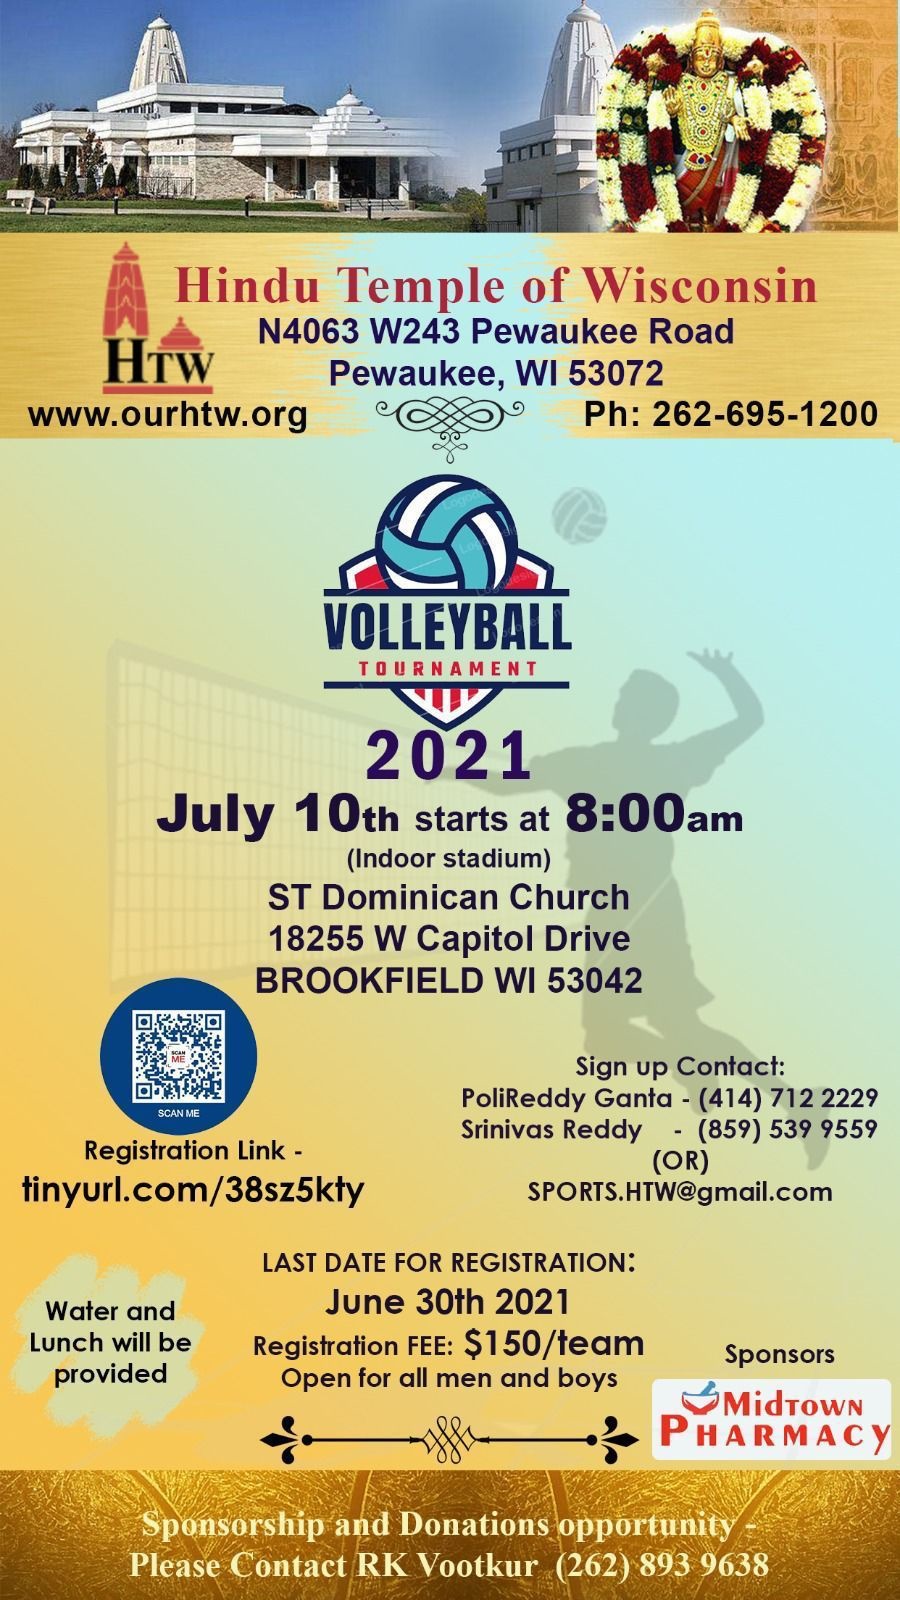 Volleyball tournament in milwaukee- july 10th 2021